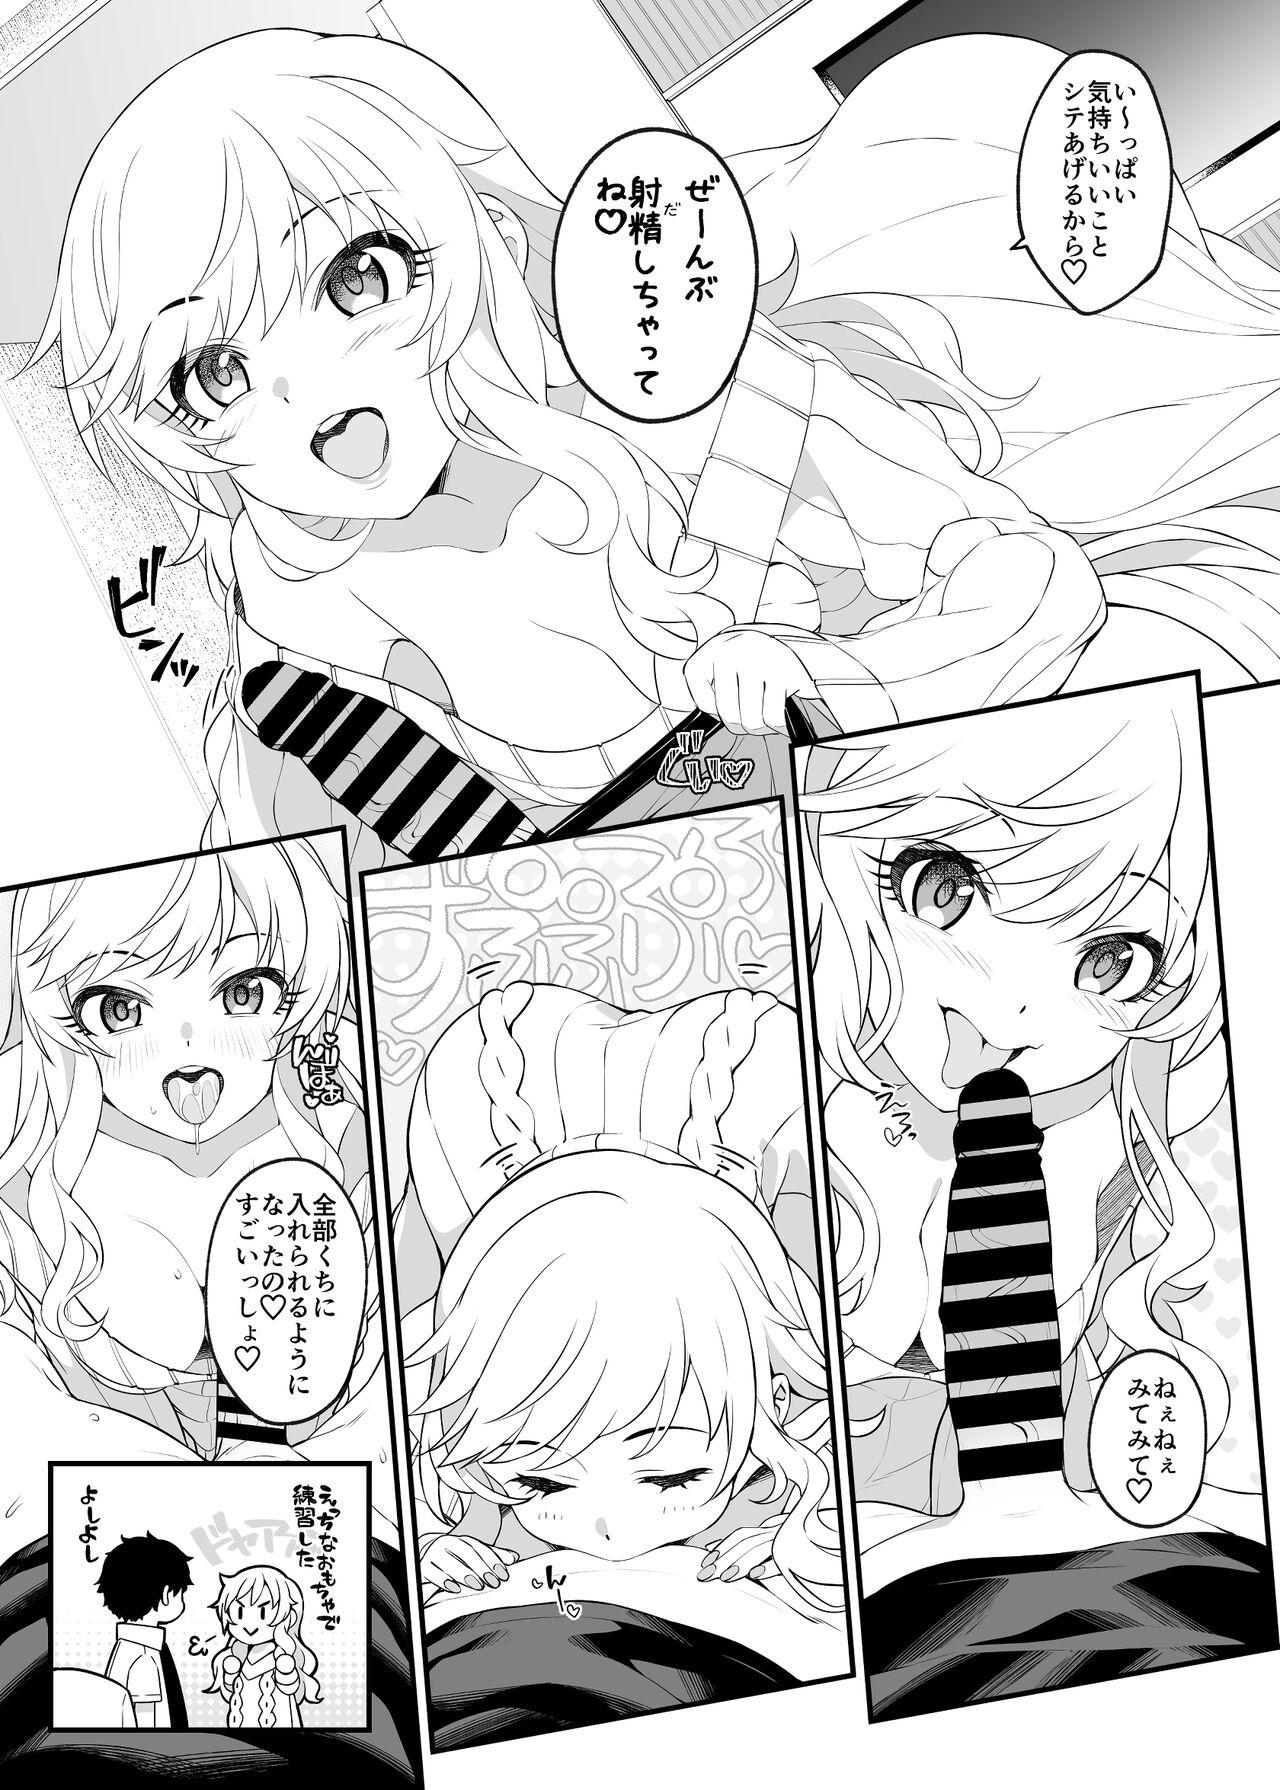 Friend Torima Pakocchao - You don't have to think about difficult things, do you? - The idolmaster Smooth - Page 6